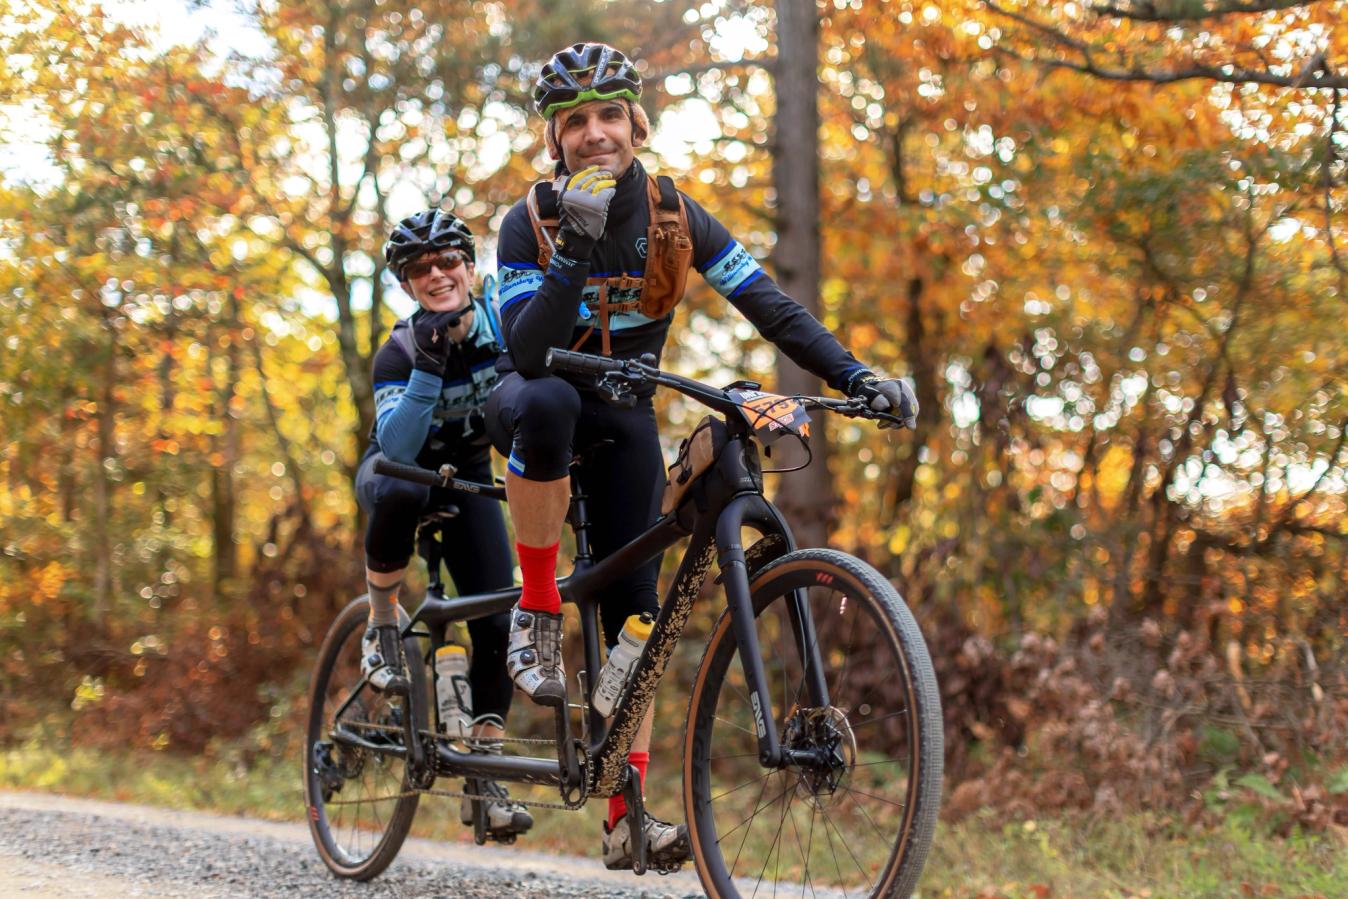 There is fun for everyone in the autumnal hills of the UnPAved course